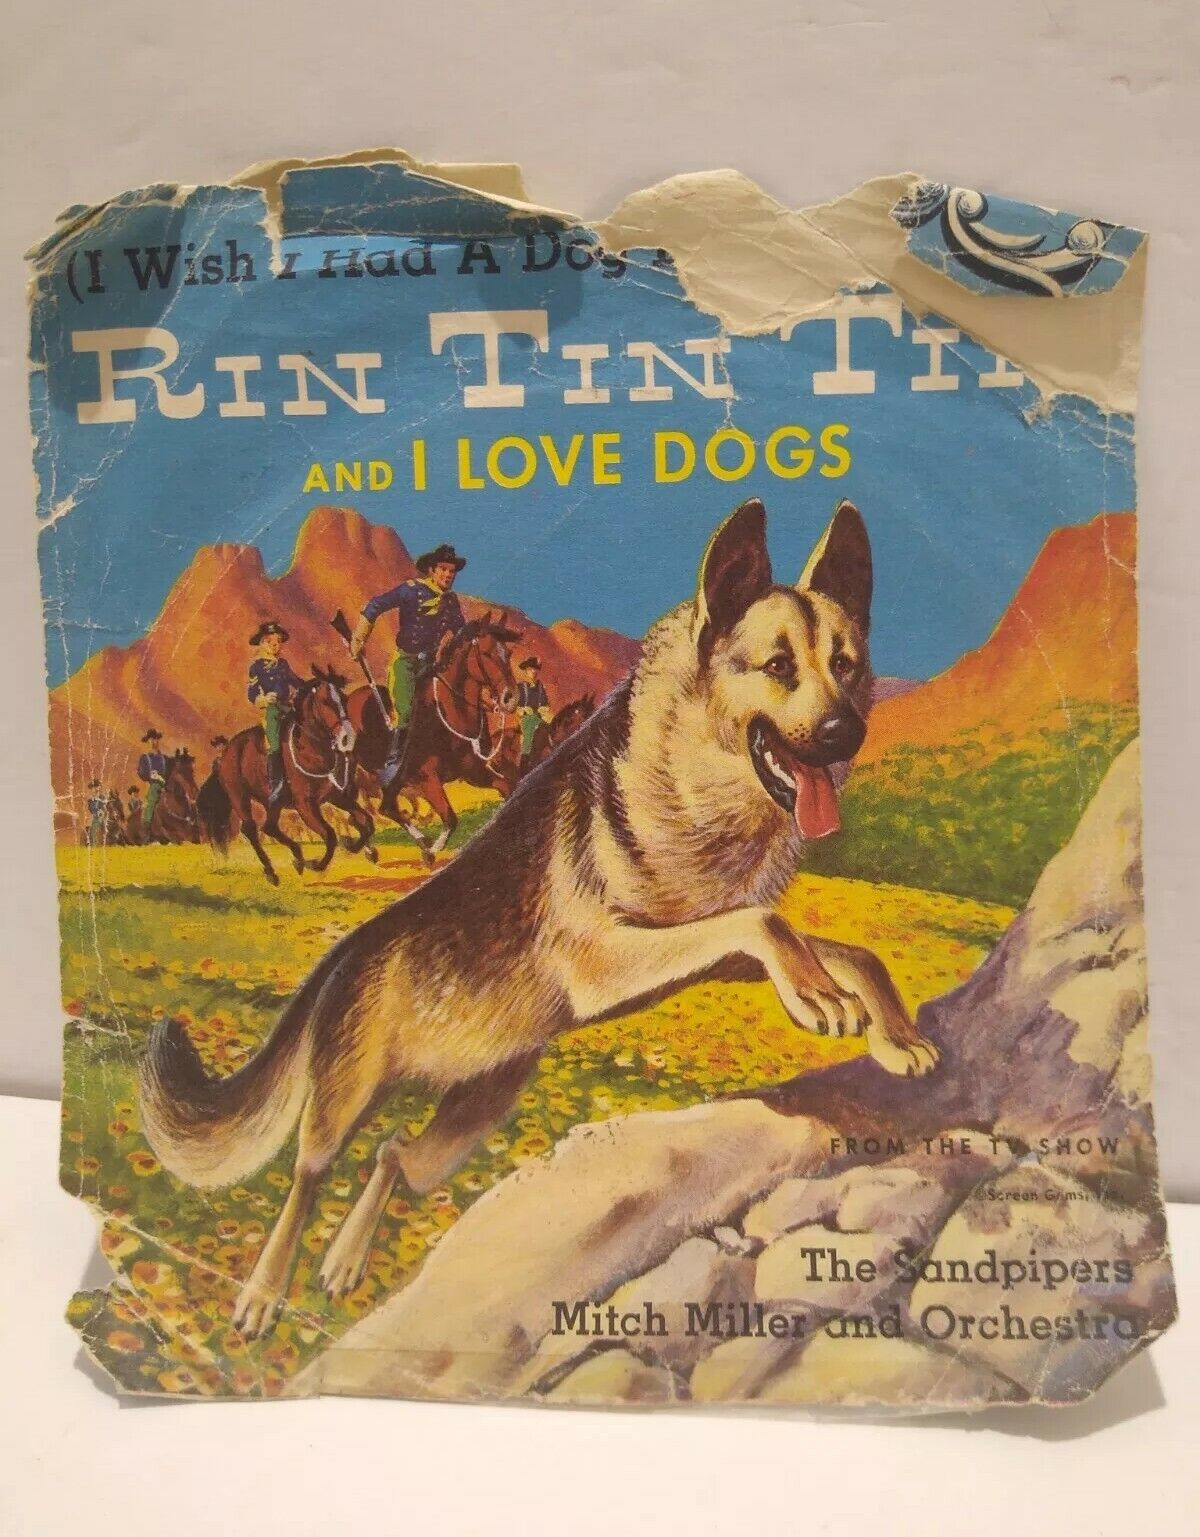 78rpm R337 RIN TIN TIN SONGS 1957 Mitch Miller & Sandpipers w/cover GOLDEN Recor